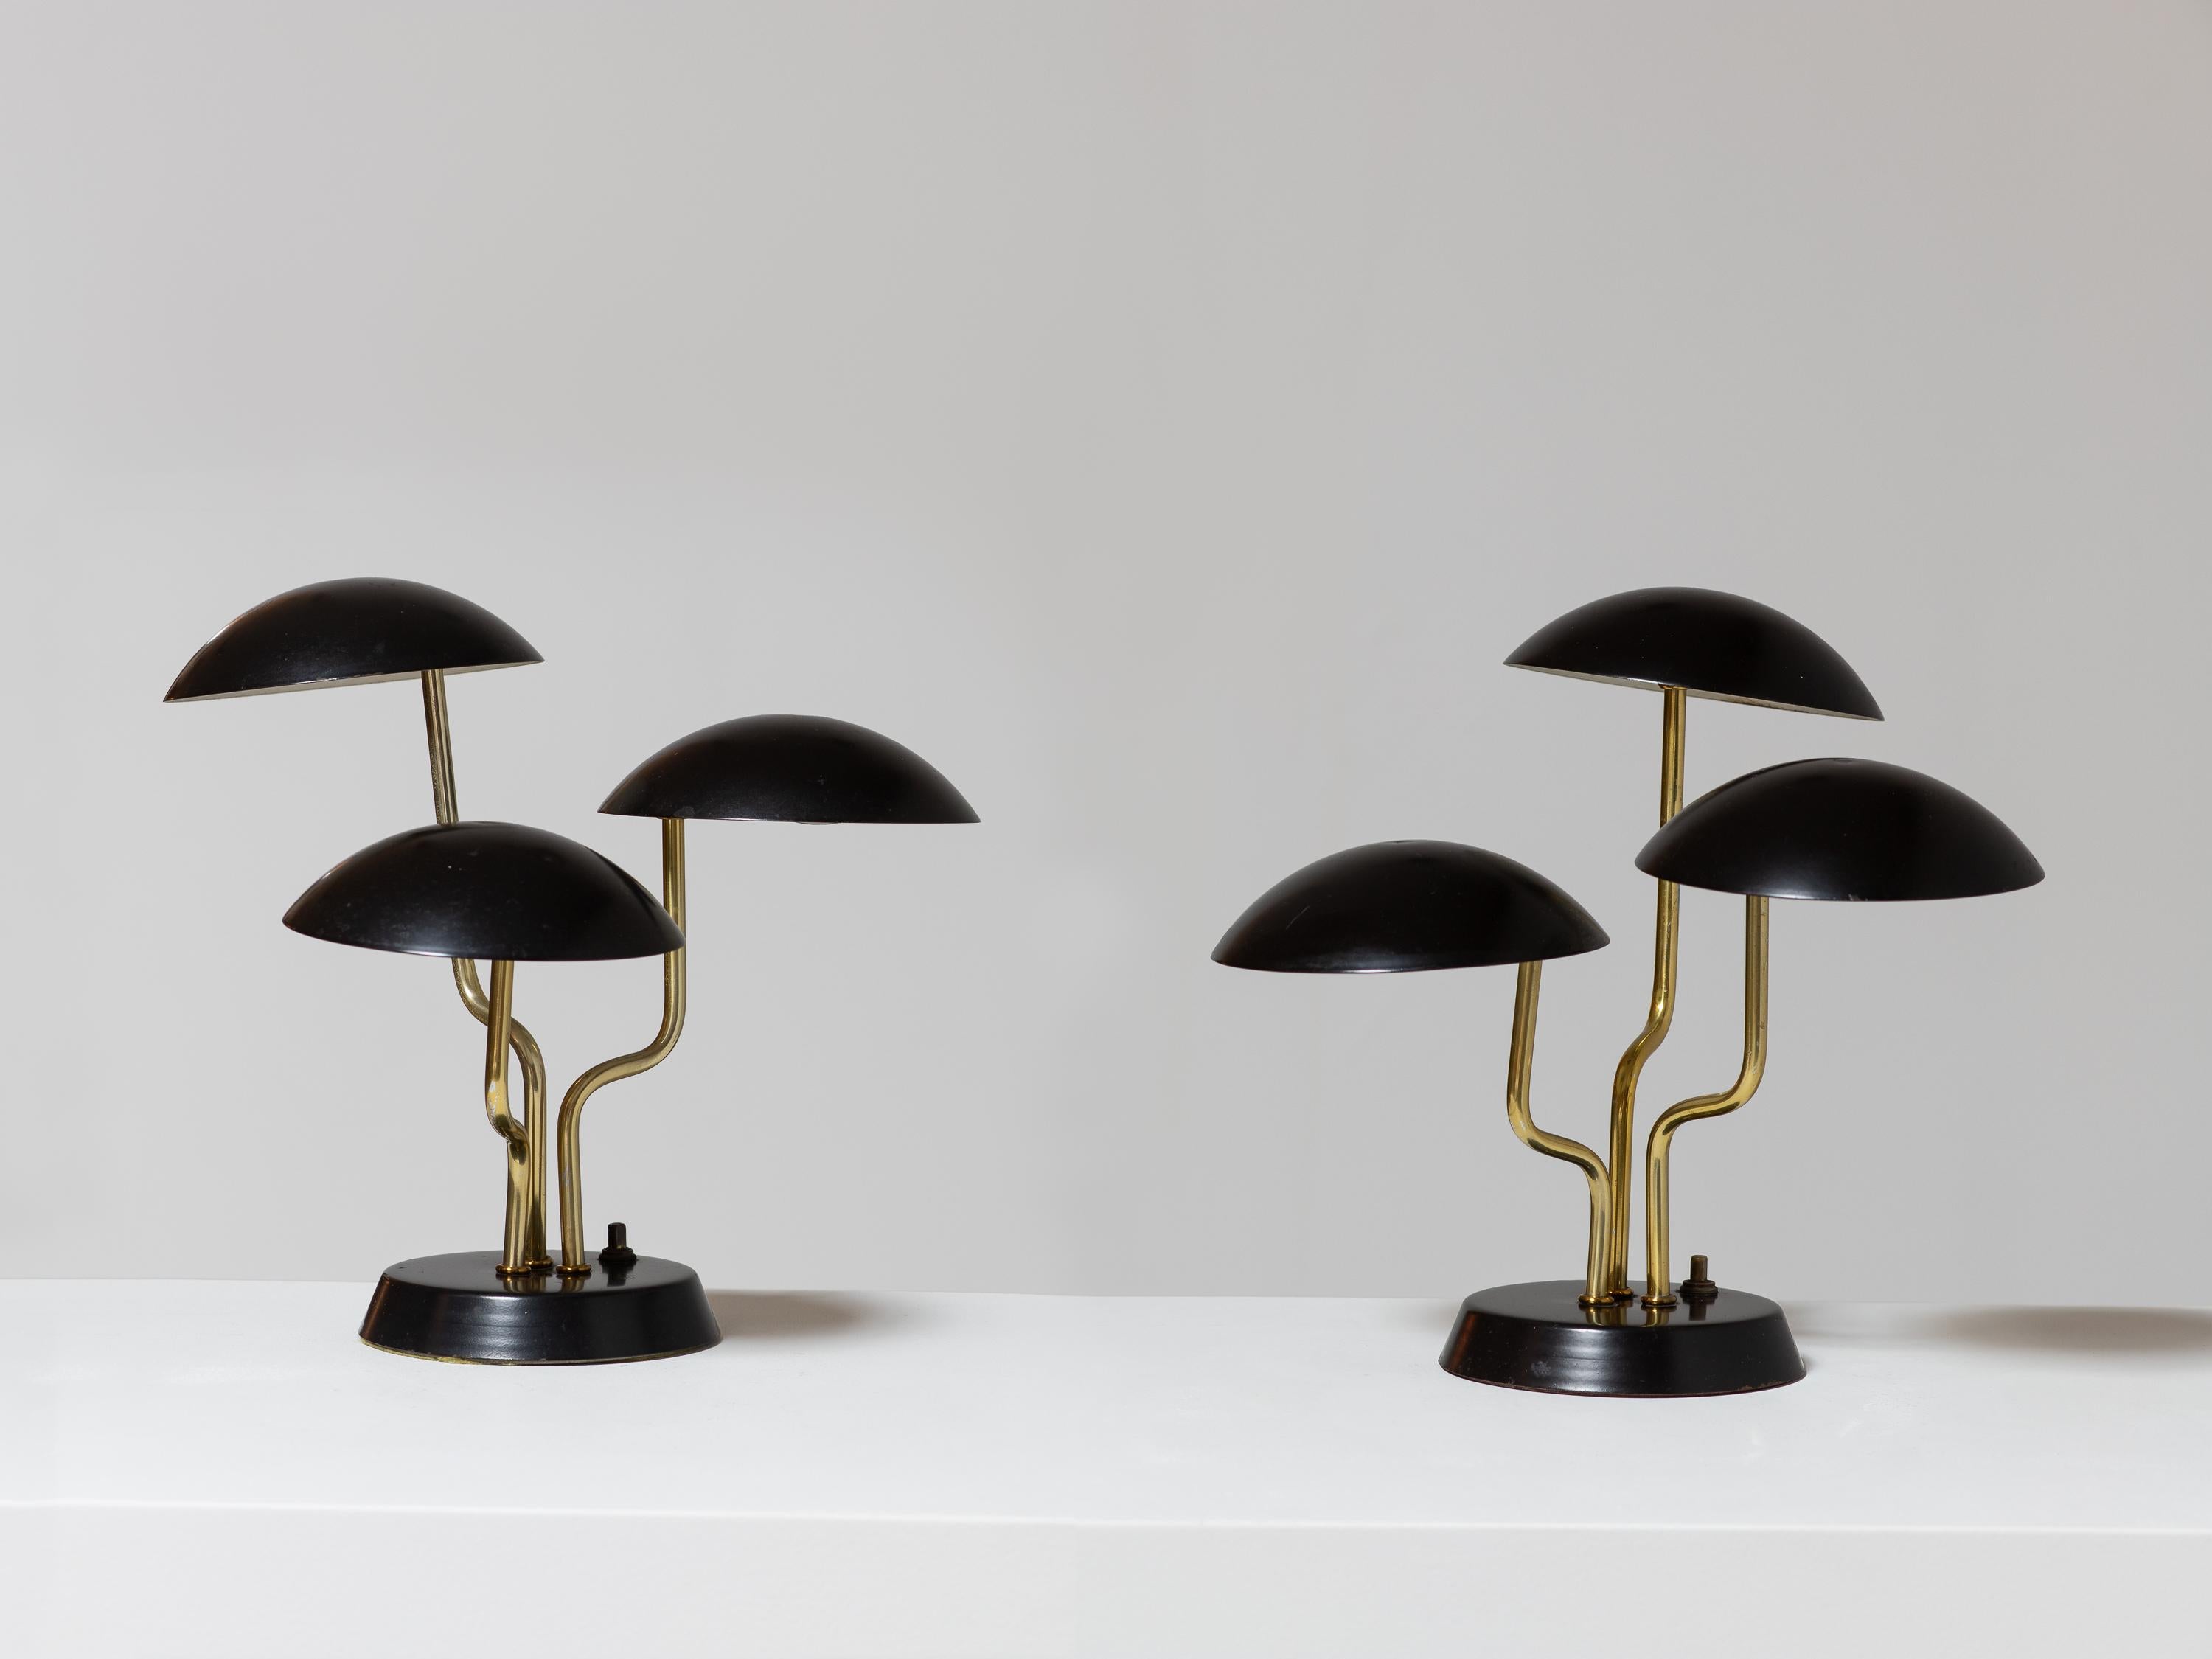 A rare pair of petite mushroom table lamps, designed by Gino Sarfatti. Three domed shades float on curved brass rods.  In wonderful condition, with minimal scratching to the original paint on shades and patina to the original finish of the rods and